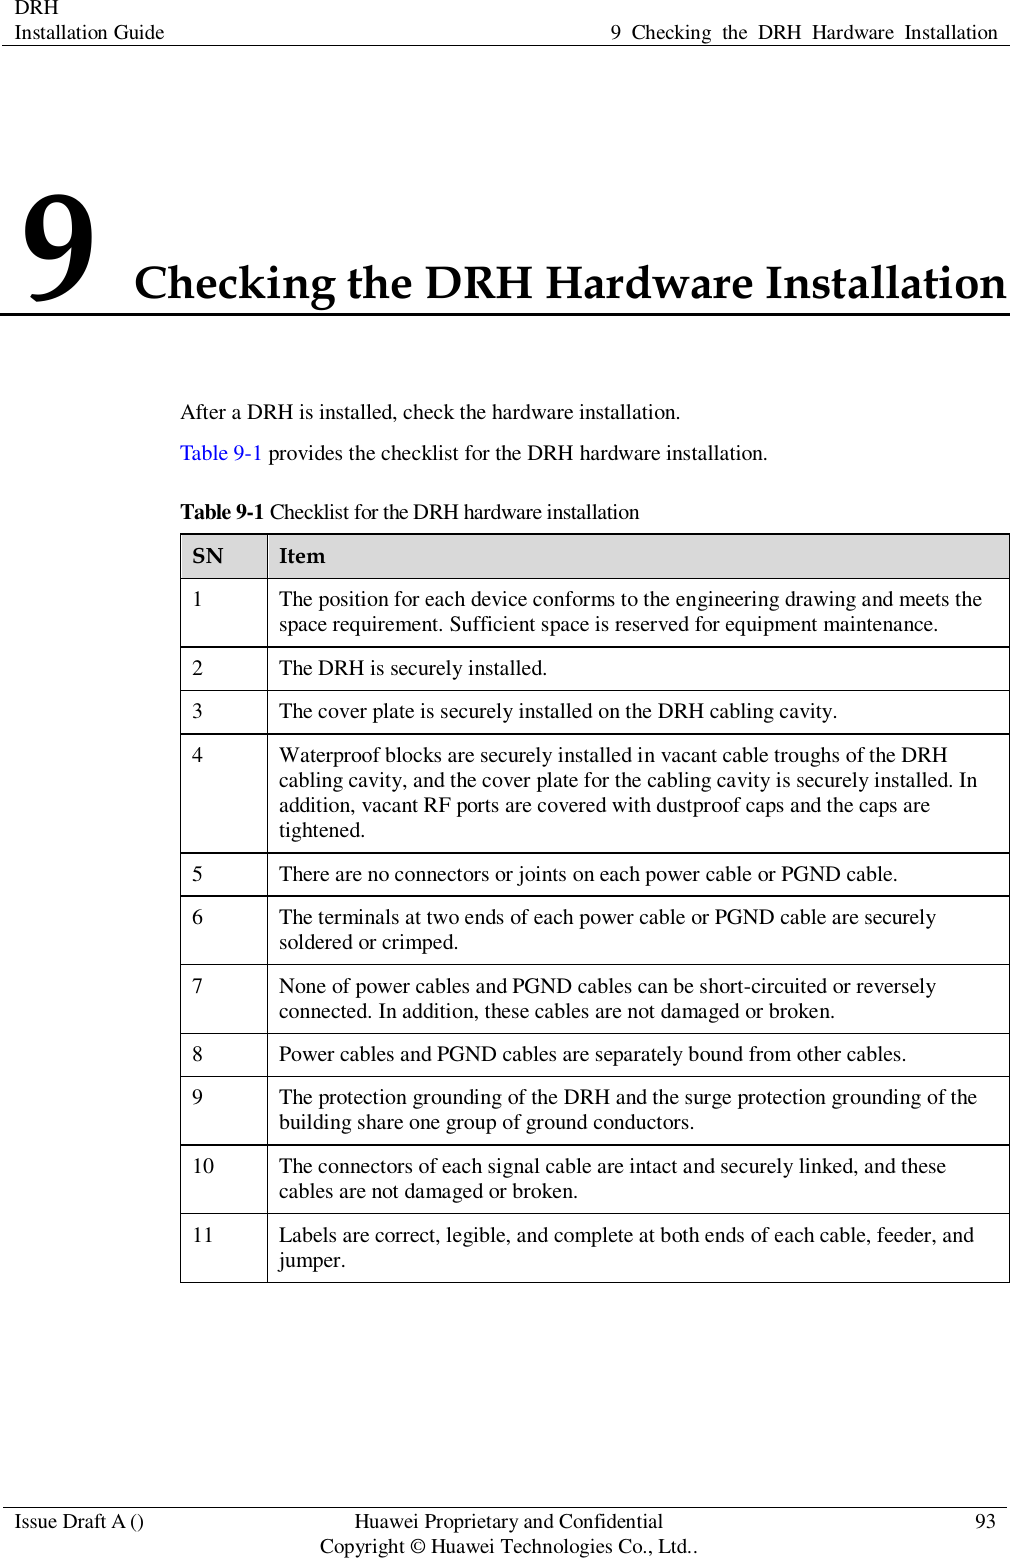 DRH   Installation Guide 9  Checking  the  DRH  Hardware  Installation  Issue Draft A () Huawei Proprietary and Confidential                                     Copyright © Huawei Technologies Co., Ltd.. 93  9 Checking the DRH Hardware Installation After a DRH is installed, check the hardware installation.   Table 9-1 provides the checklist for the DRH hardware installation. Table 9-1 Checklist for the DRH hardware installation SN Item 1 The position for each device conforms to the engineering drawing and meets the space requirement. Sufficient space is reserved for equipment maintenance.   2 The DRH is securely installed. 3 The cover plate is securely installed on the DRH cabling cavity.   4 Waterproof blocks are securely installed in vacant cable troughs of the DRH cabling cavity, and the cover plate for the cabling cavity is securely installed. In addition, vacant RF ports are covered with dustproof caps and the caps are tightened. 5 There are no connectors or joints on each power cable or PGND cable.   6 The terminals at two ends of each power cable or PGND cable are securely soldered or crimped. 7 None of power cables and PGND cables can be short-circuited or reversely connected. In addition, these cables are not damaged or broken. 8 Power cables and PGND cables are separately bound from other cables.   9 The protection grounding of the DRH and the surge protection grounding of the building share one group of ground conductors. 10 The connectors of each signal cable are intact and securely linked, and these cables are not damaged or broken. 11 Labels are correct, legible, and complete at both ends of each cable, feeder, and jumper.     